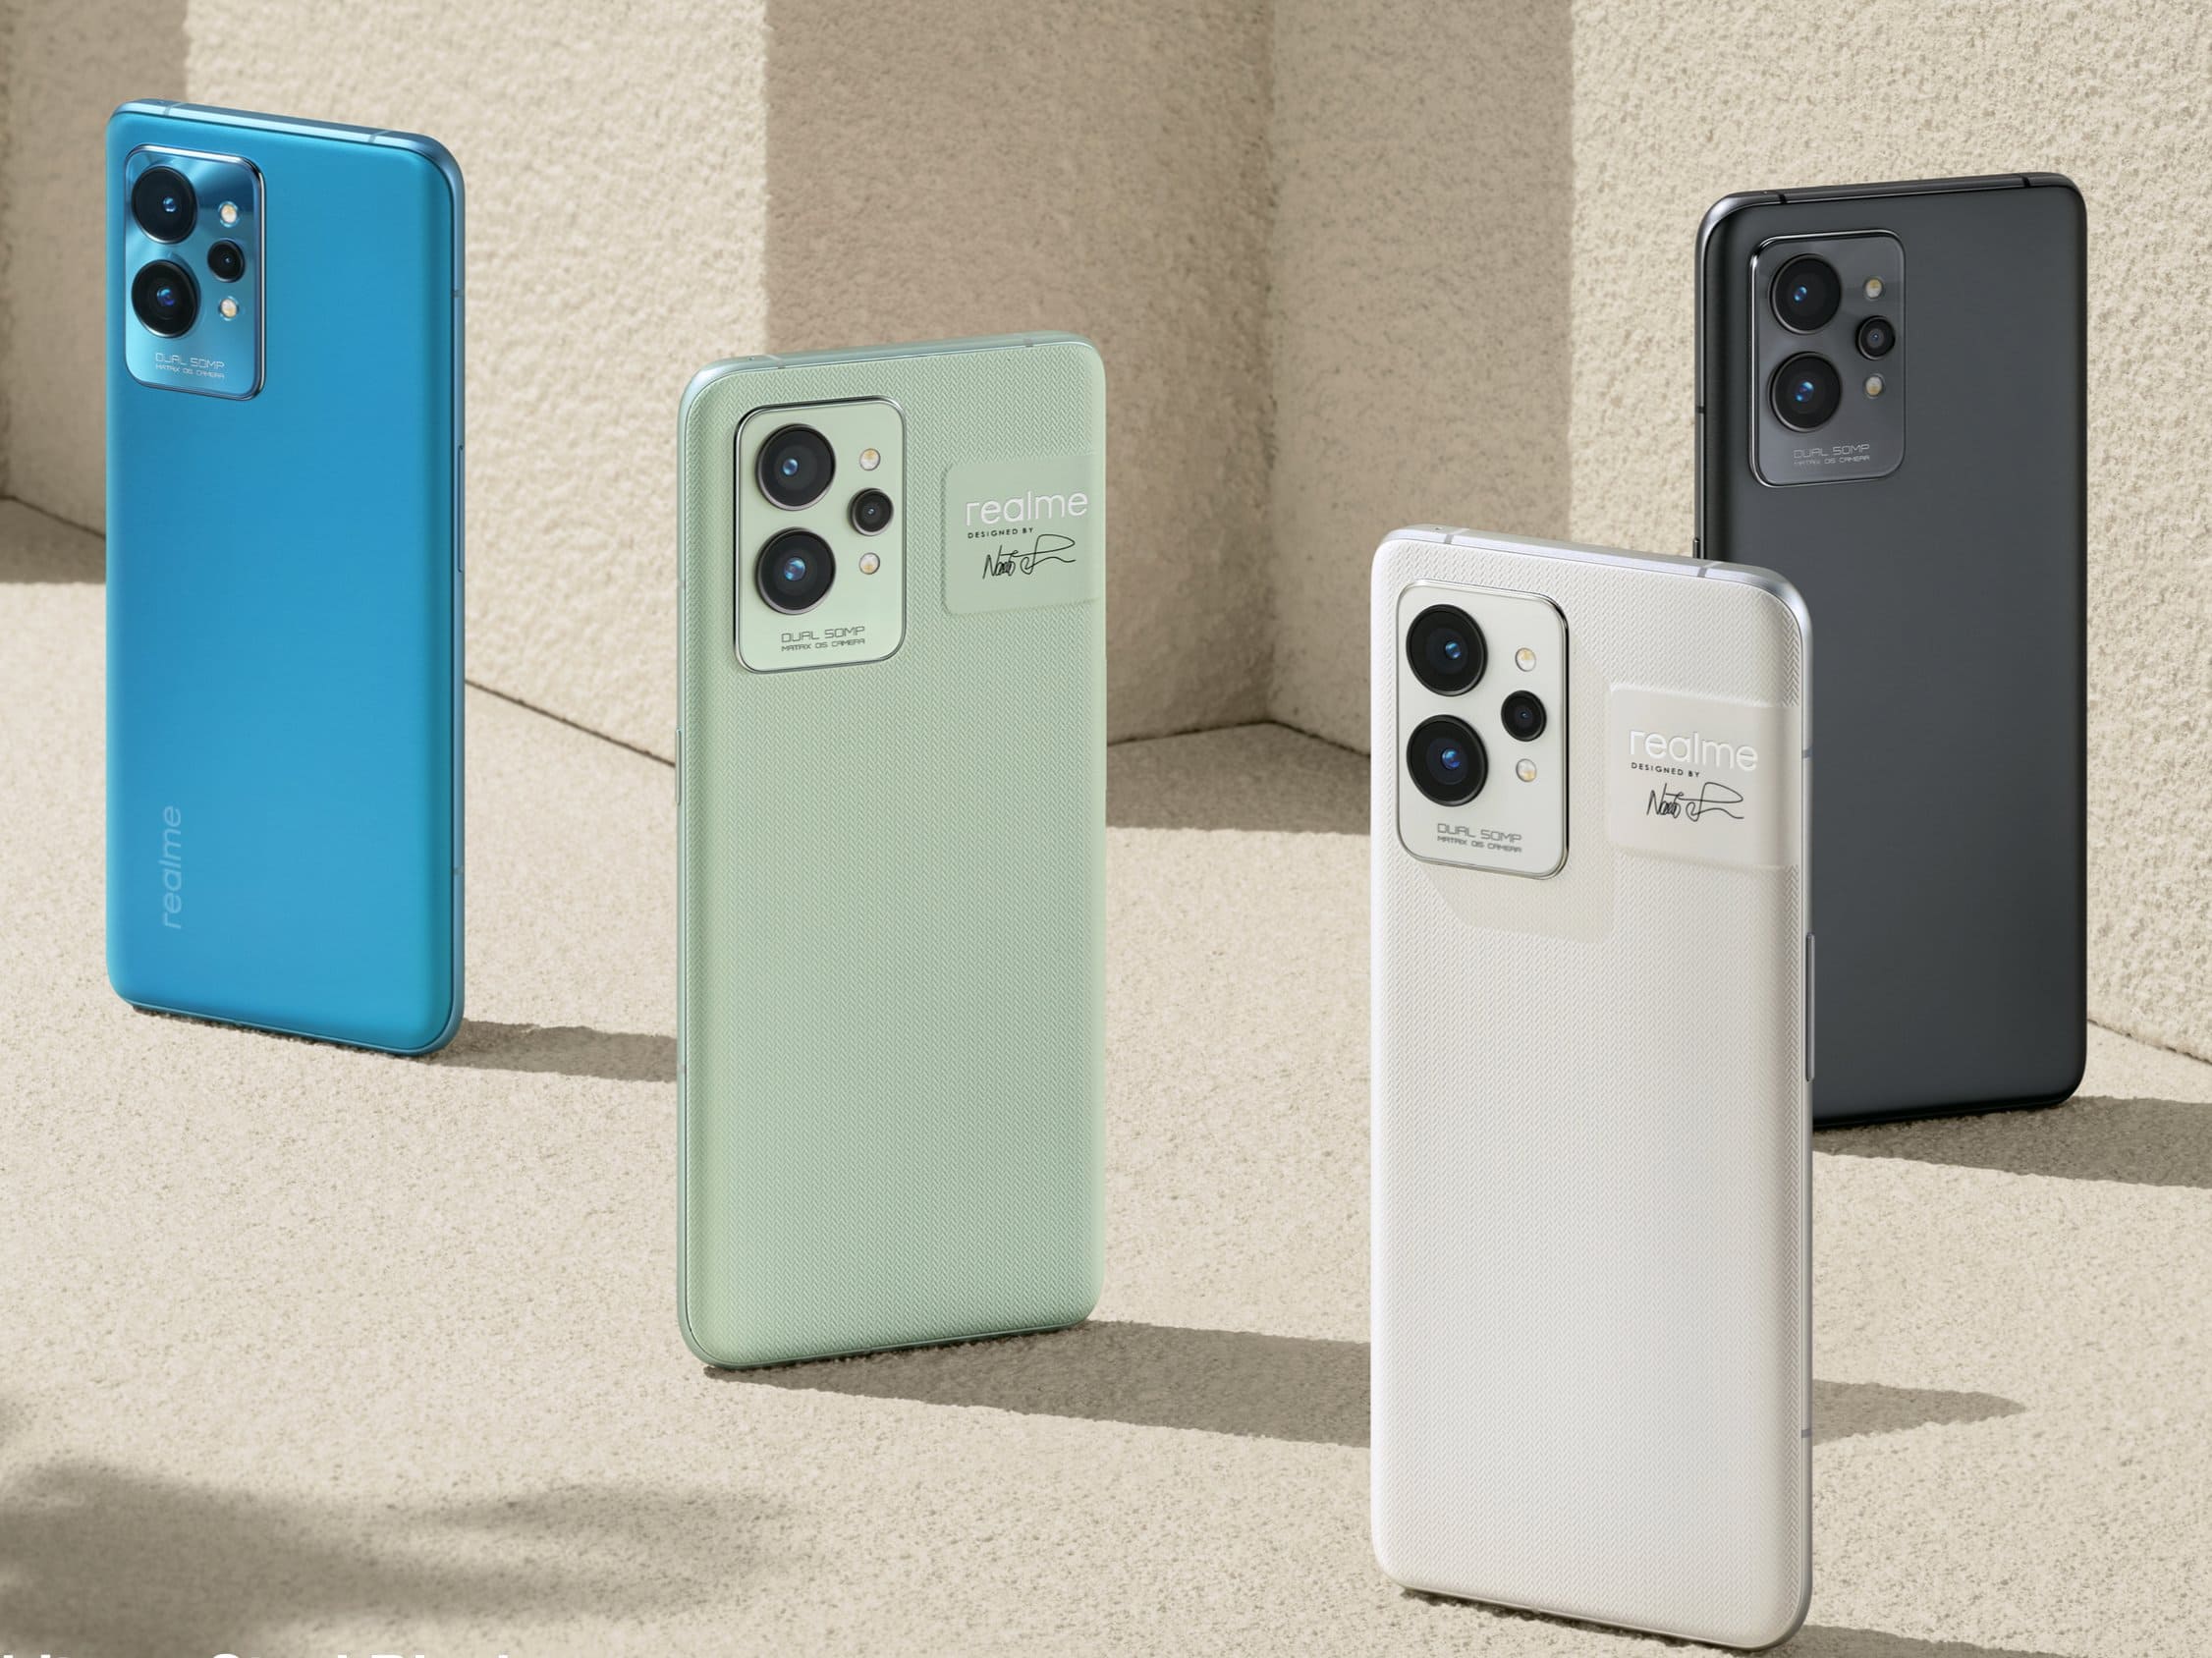 Realme GT 2 Pro launched in China & is their most premium flagship phone yet. UK/EU launch soon